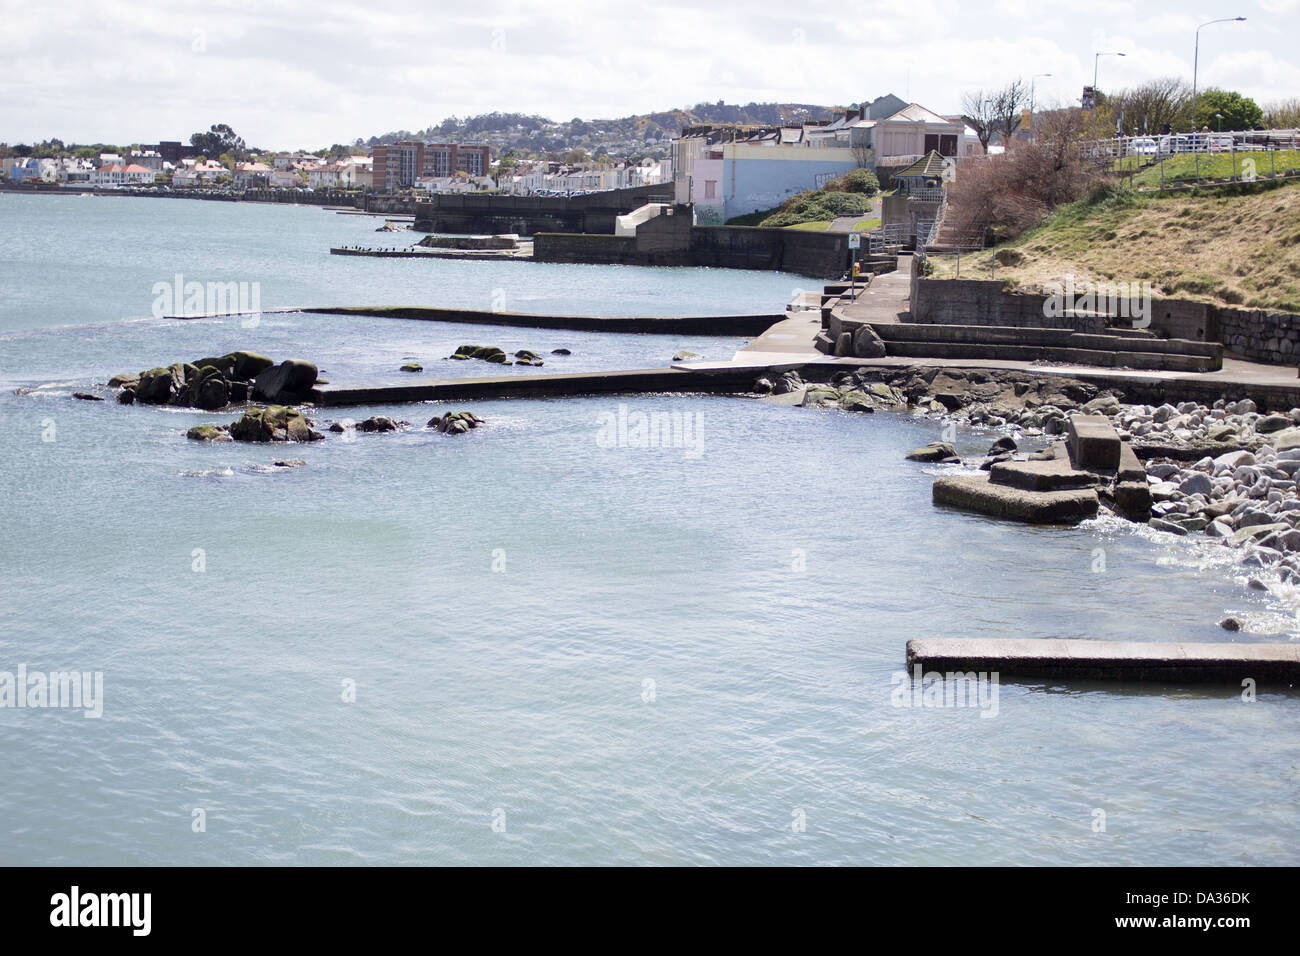 View of the coastline of Dún Laoghaire, Co. Dublin, Ireland. Stock Photo